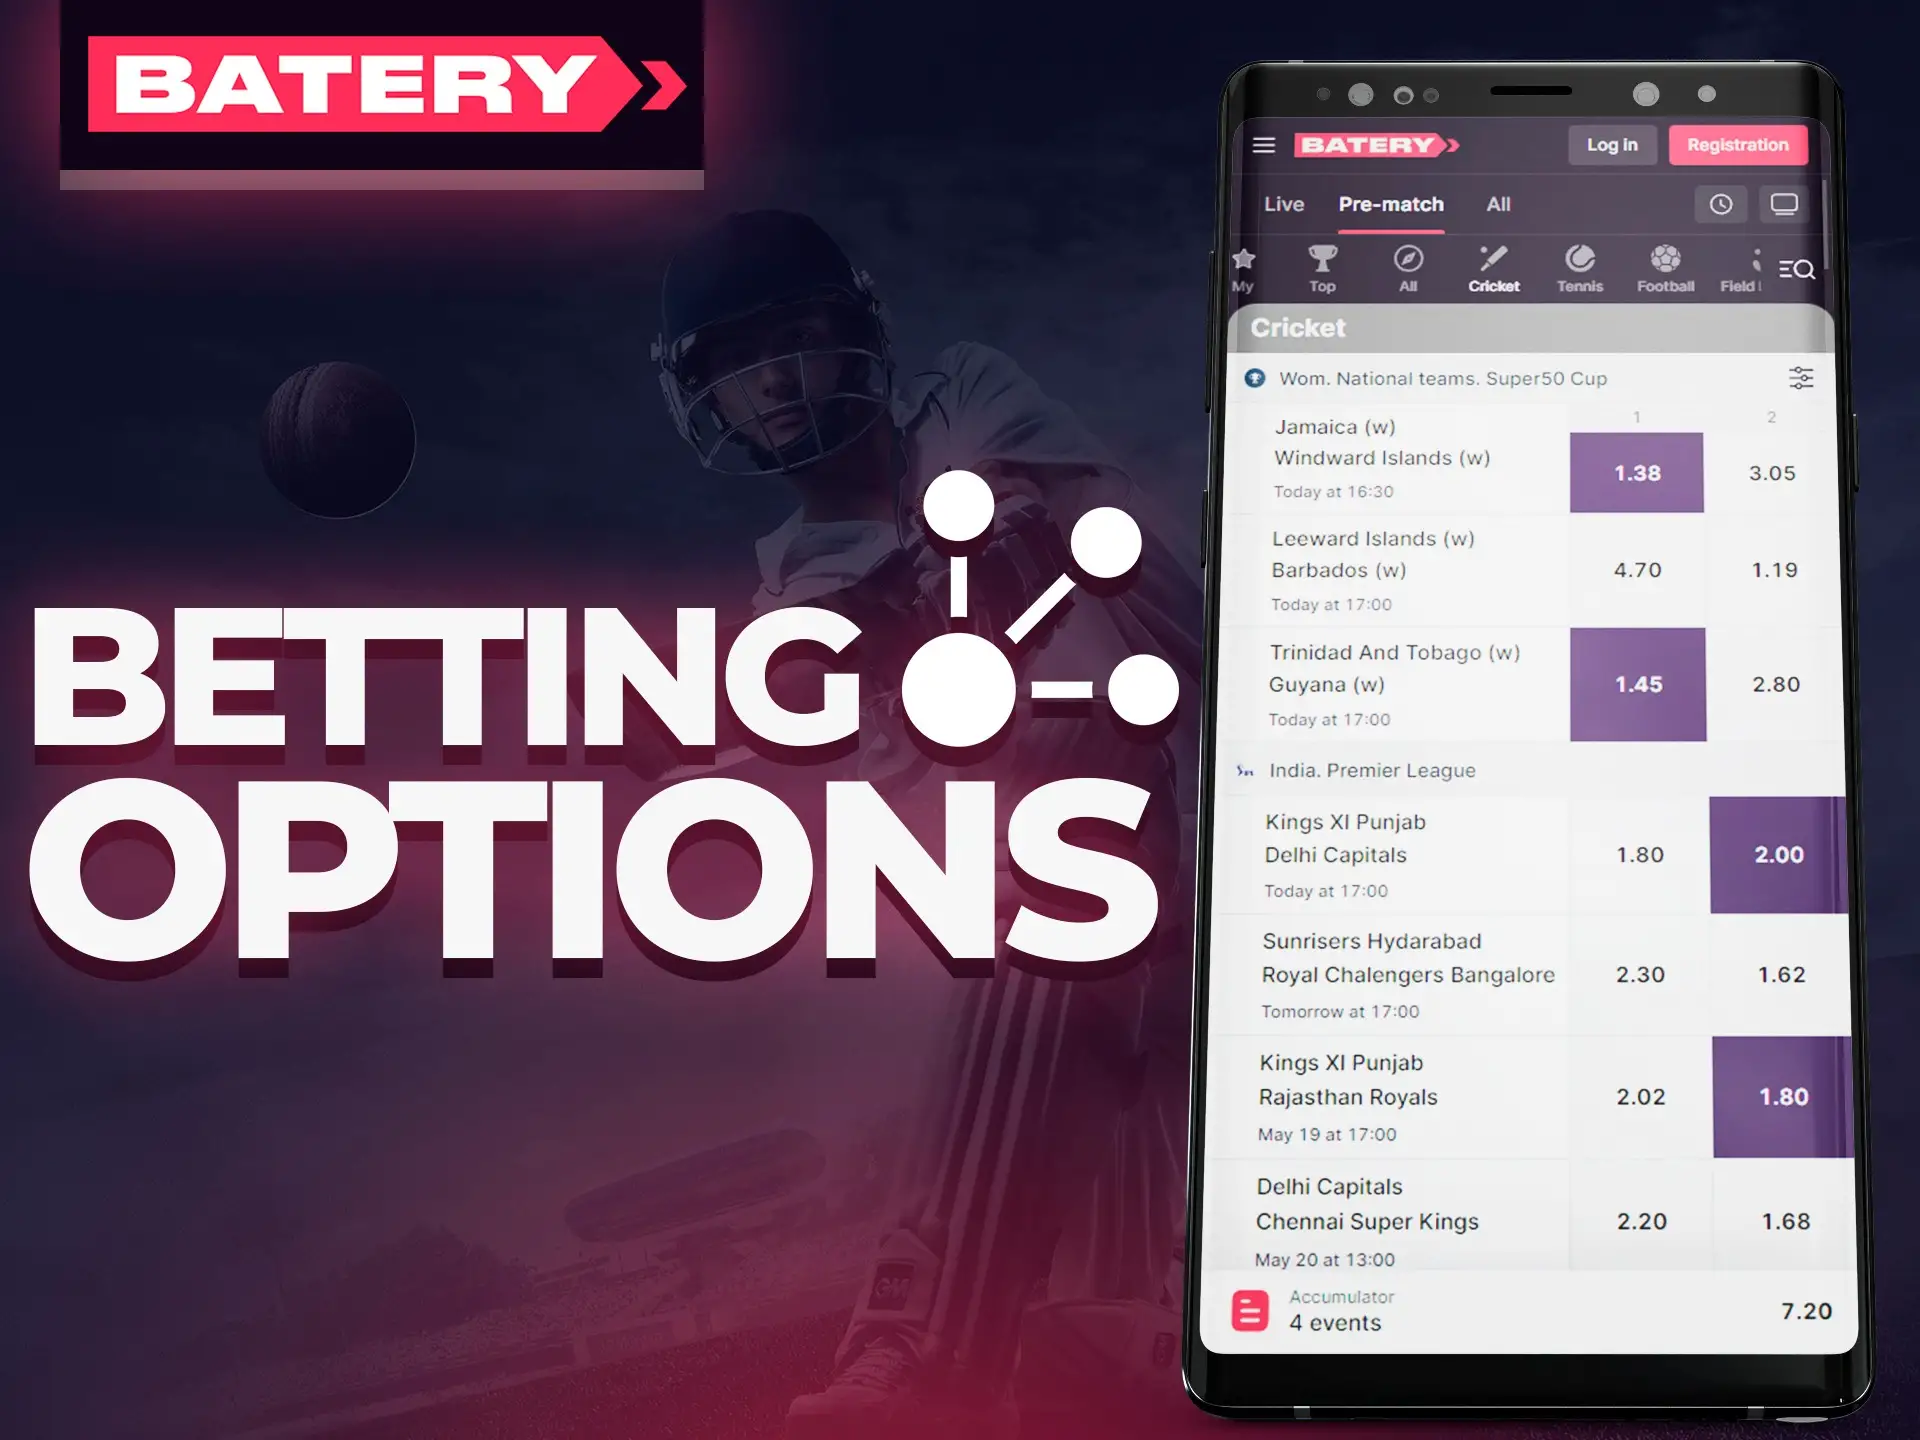 Make bets by choosing prefered Batery betting option.